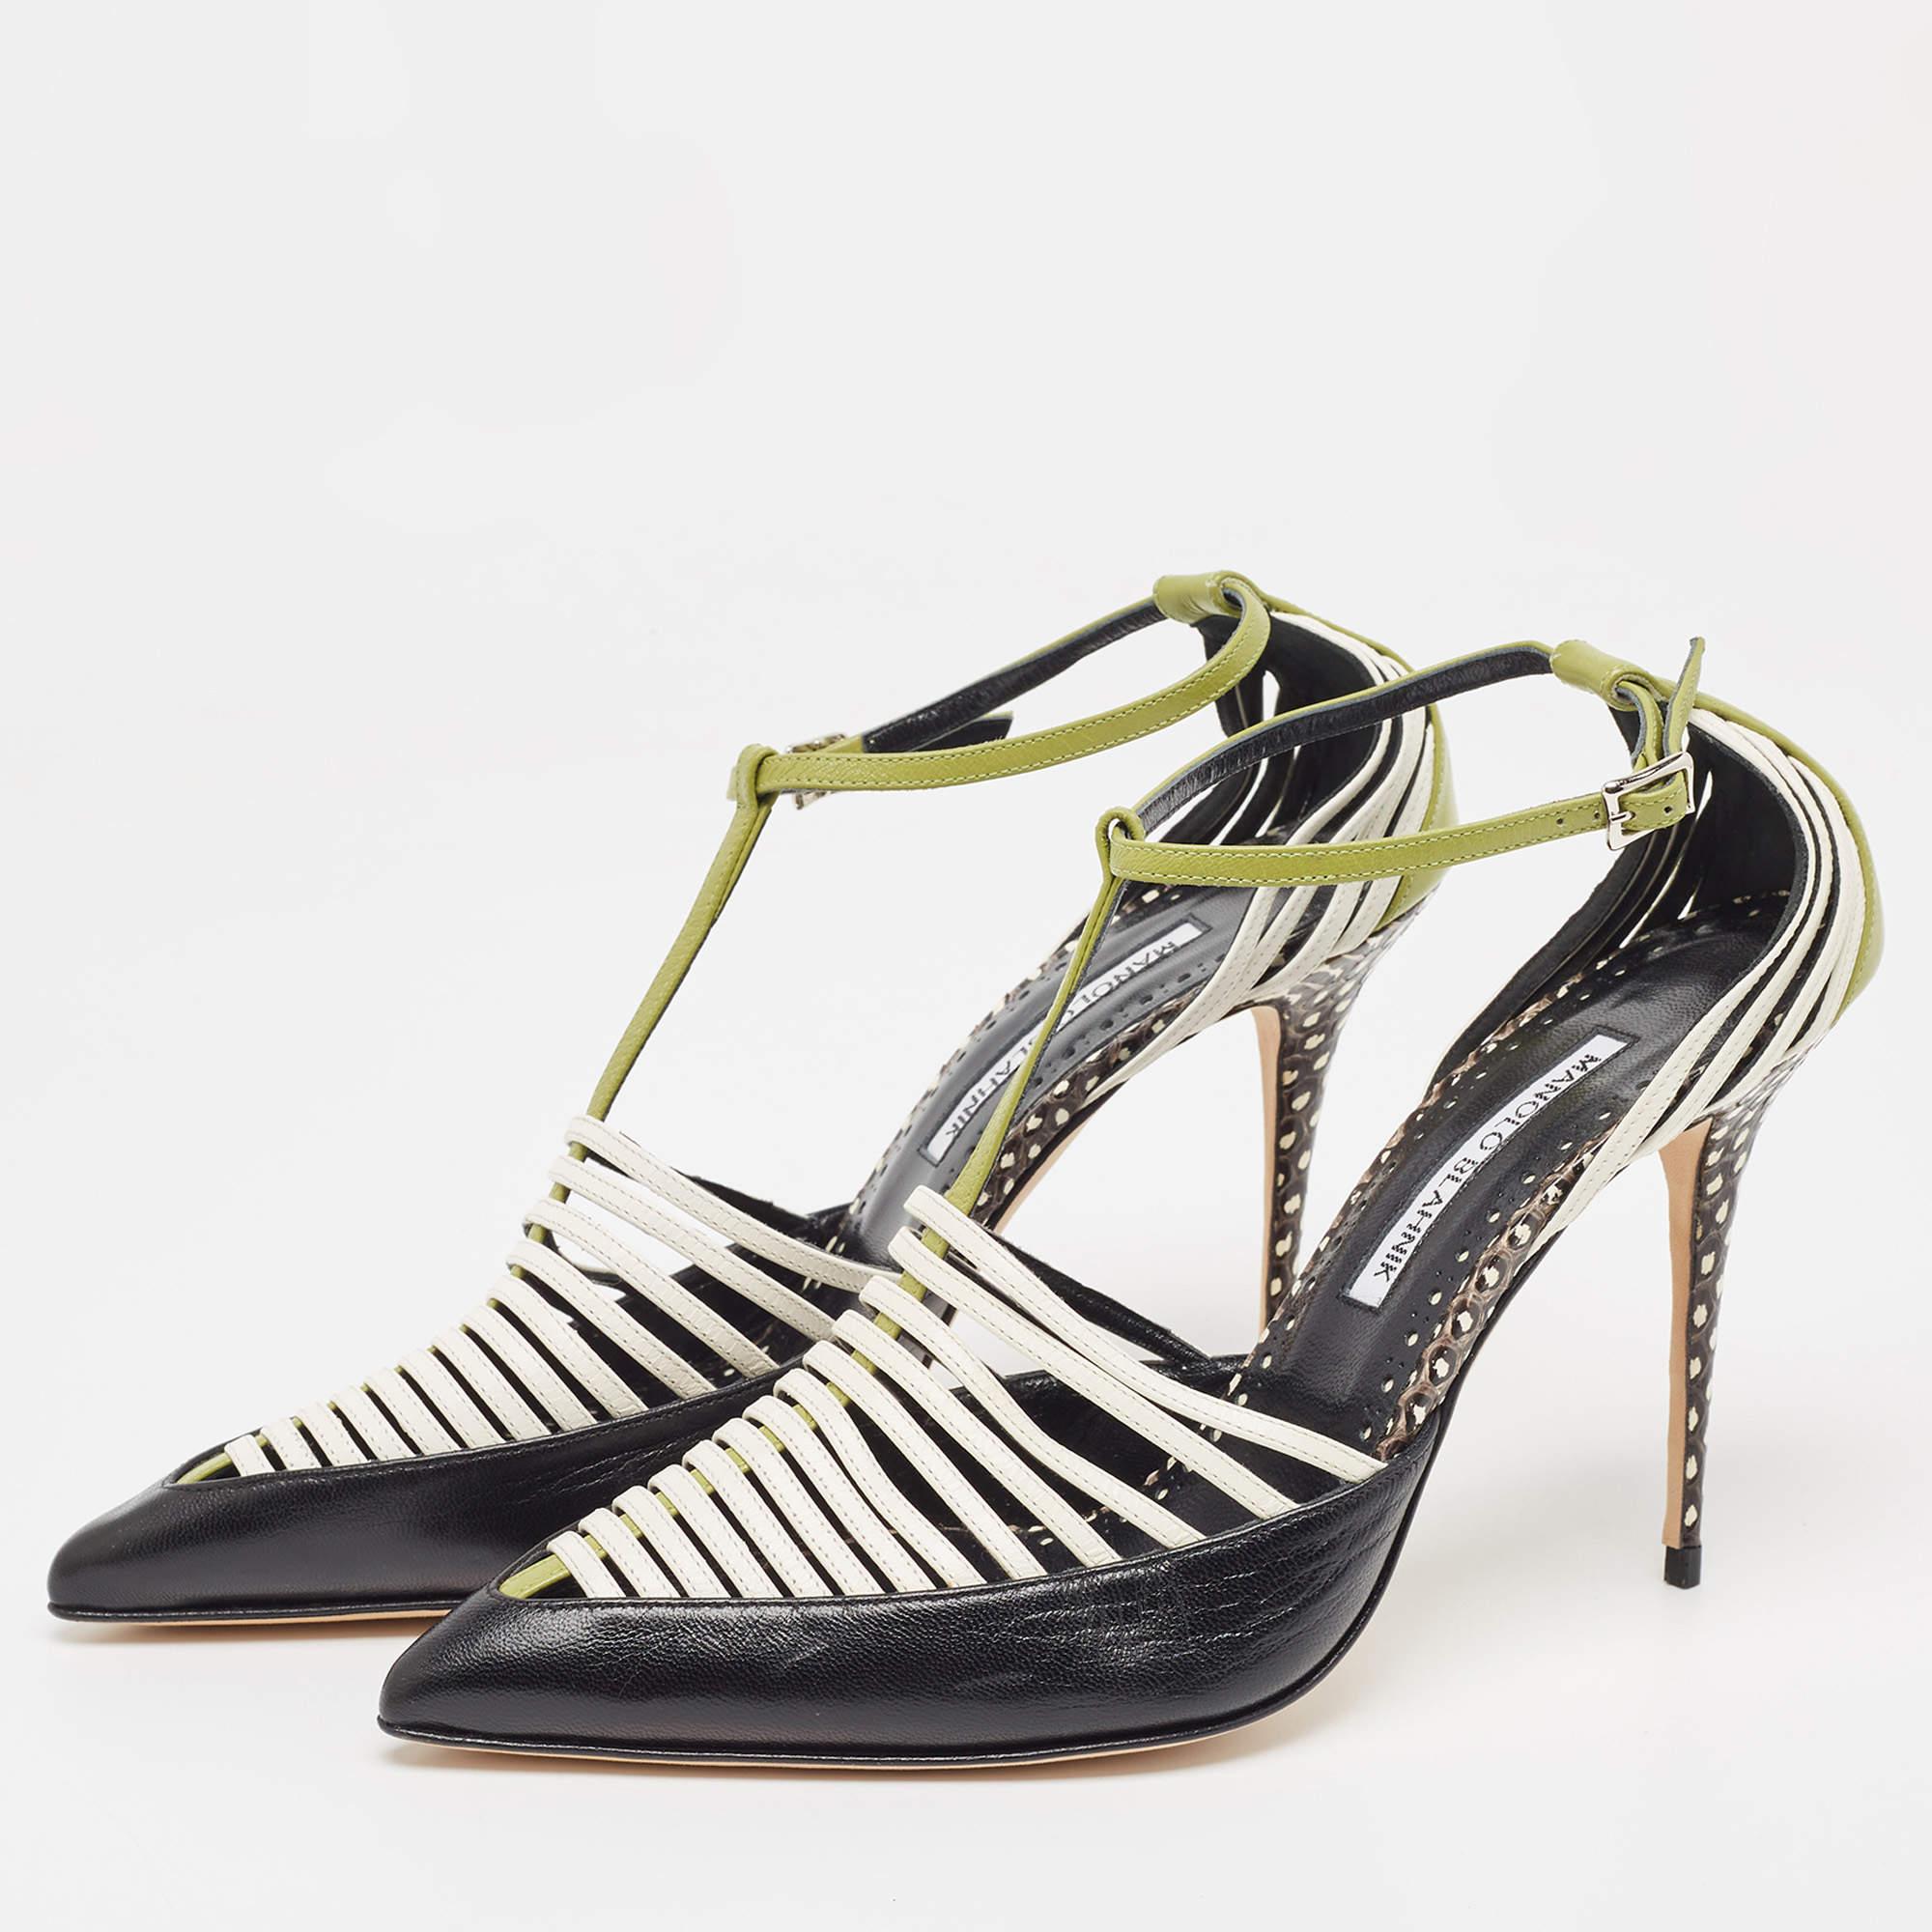 Manolo Blahnik Multicolor Watersnake and Leather Strappy Sandals Size 39.5 In Excellent Condition For Sale In Dubai, Al Qouz 2